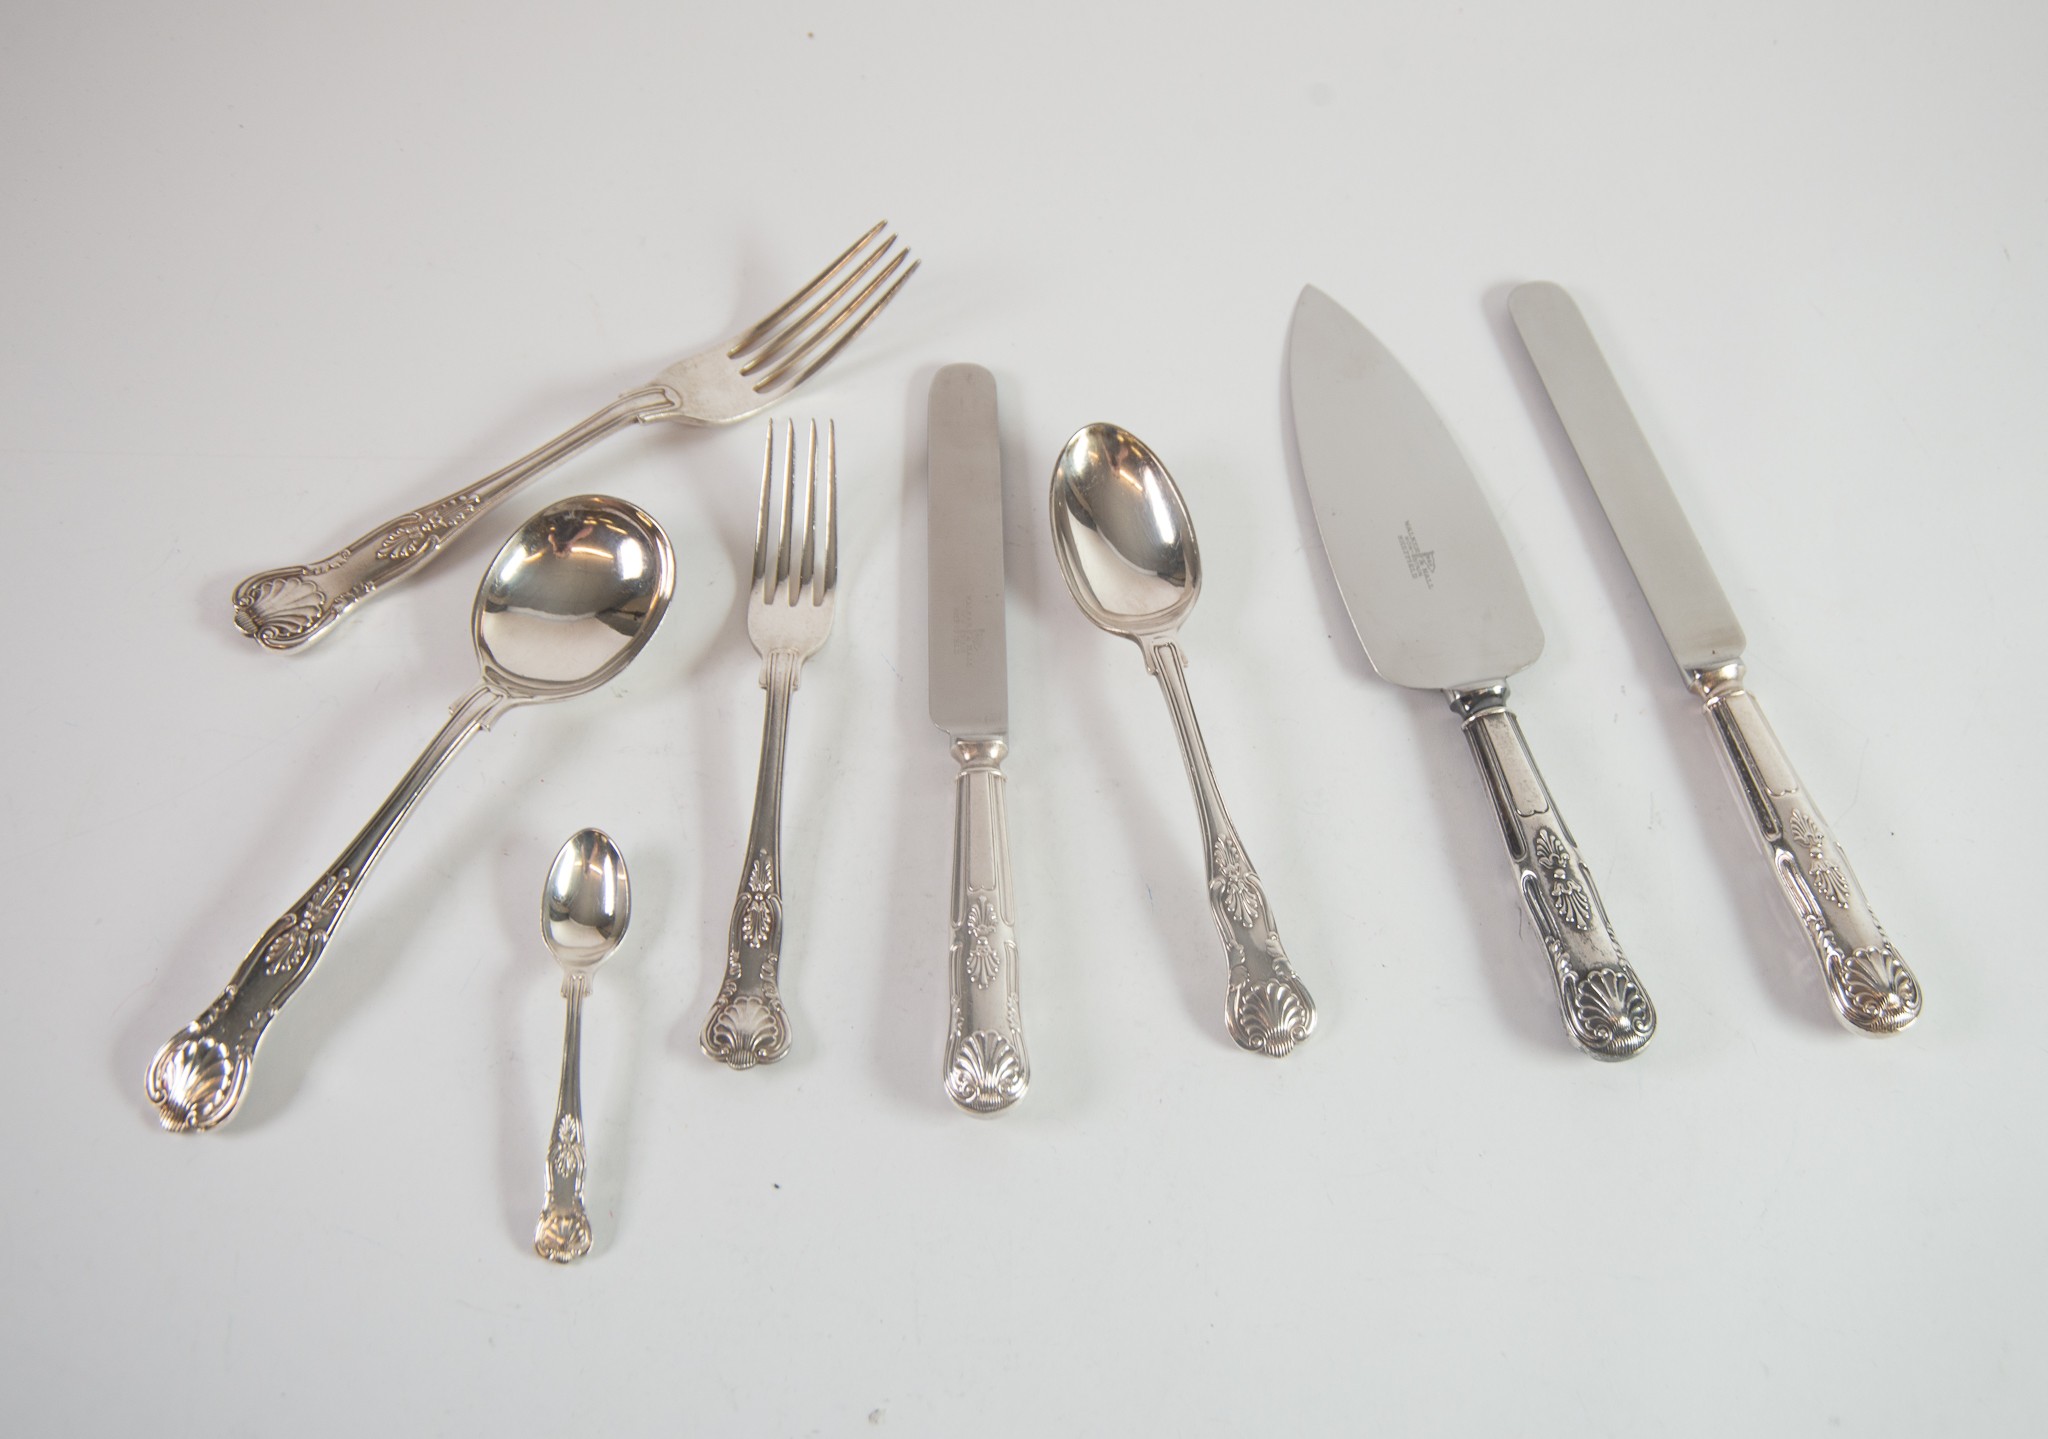 NINETY FOUR PIECE TABLE SERVICE OF KINGS PATTERN ELECTROPLATED CUTLERY BY WALKER & HALL, comprising: